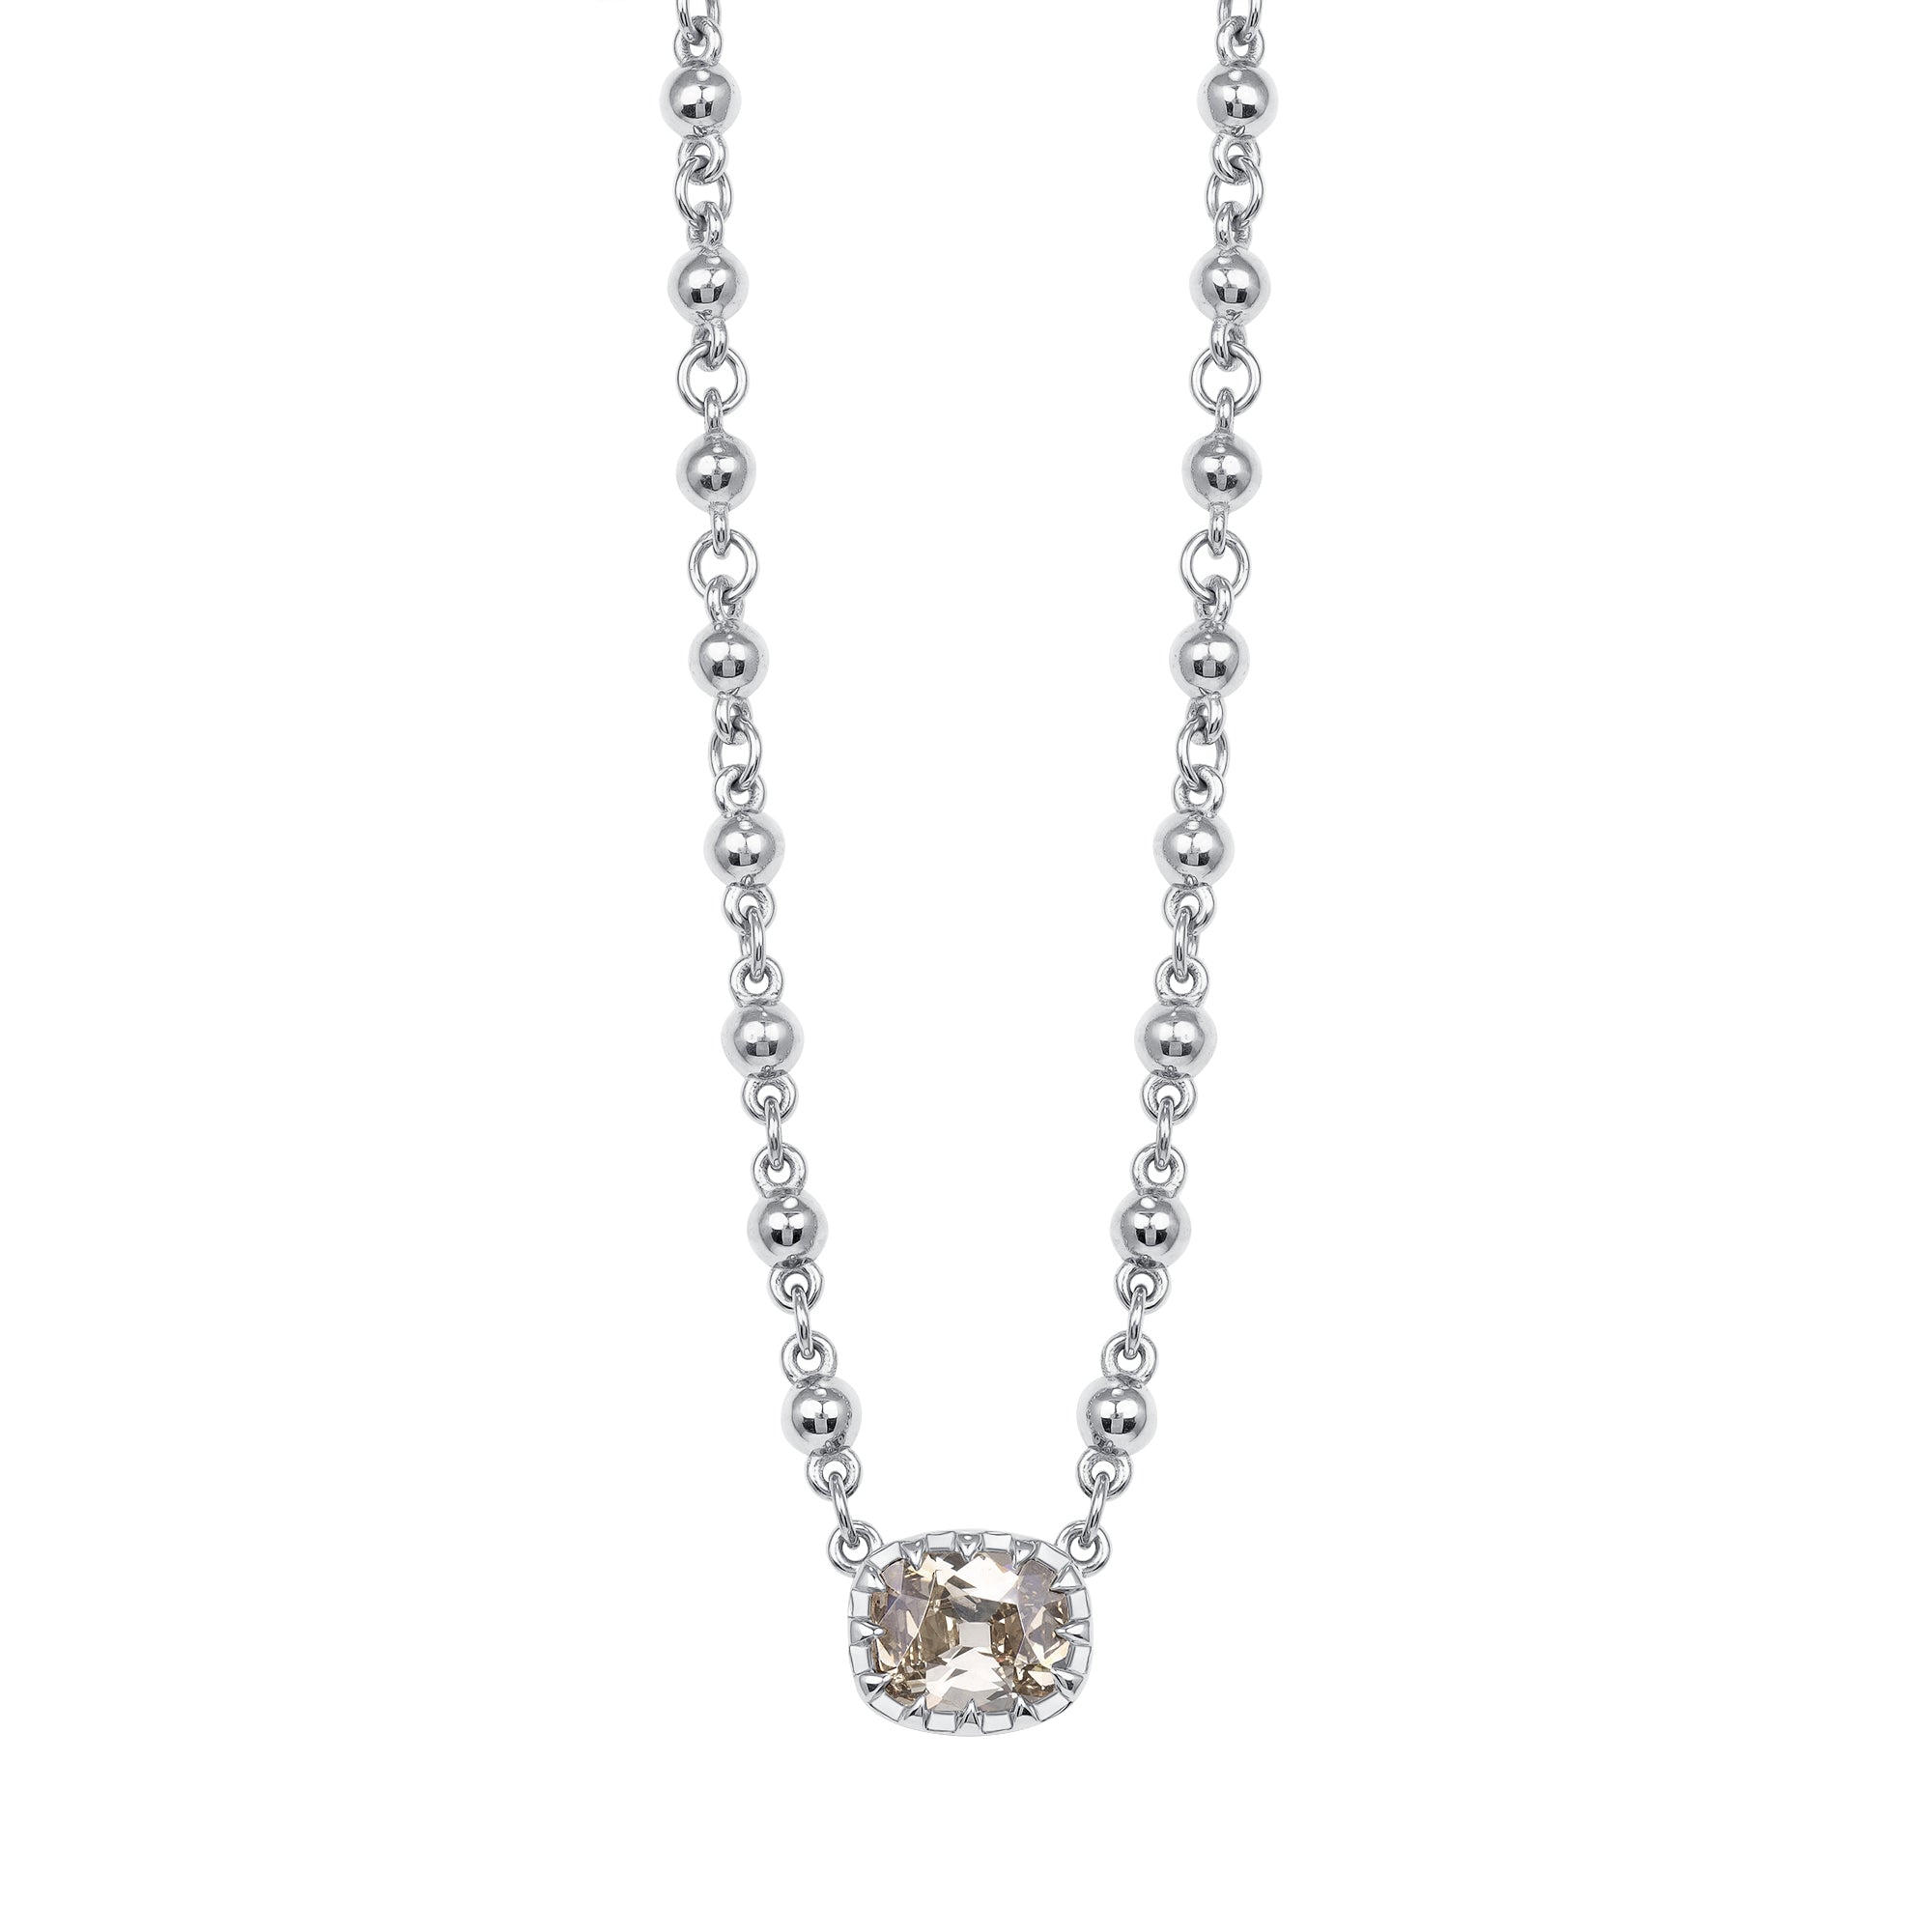 Single Stone ROSALINA NECKLACE featuring 1.41ct Fancy Dark Brown/I1 GIA certified antique Cushion cut diamond prong set on a handcrafted 18K champagne white gold pendant necklace. Necklace measures 17".